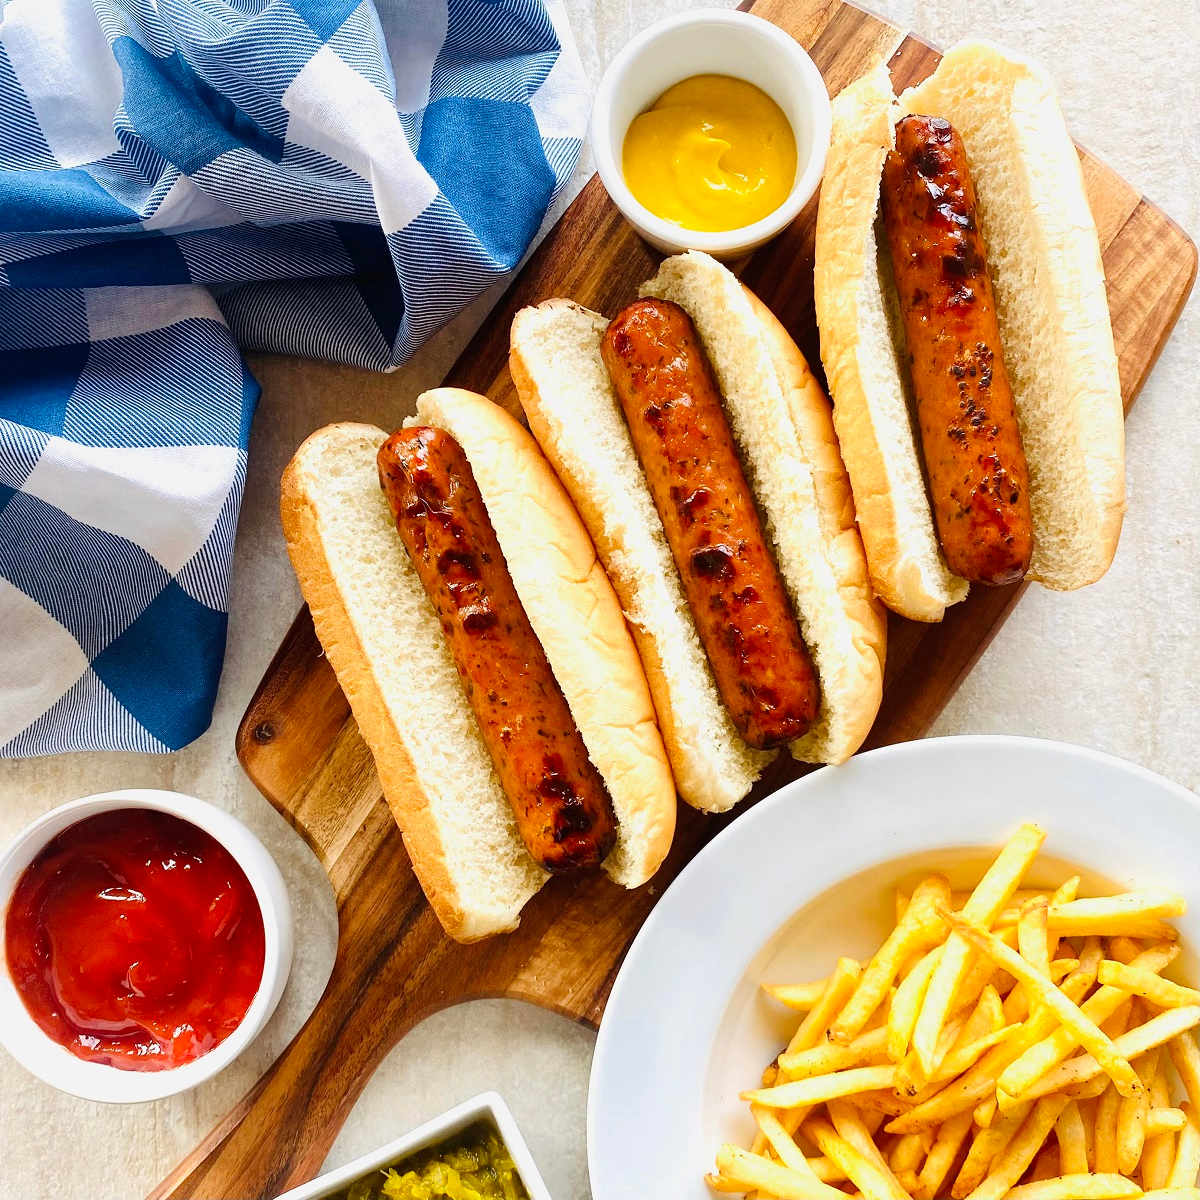 chicken sausage in buns with ketchup, relish, mustard and a side of french fries.